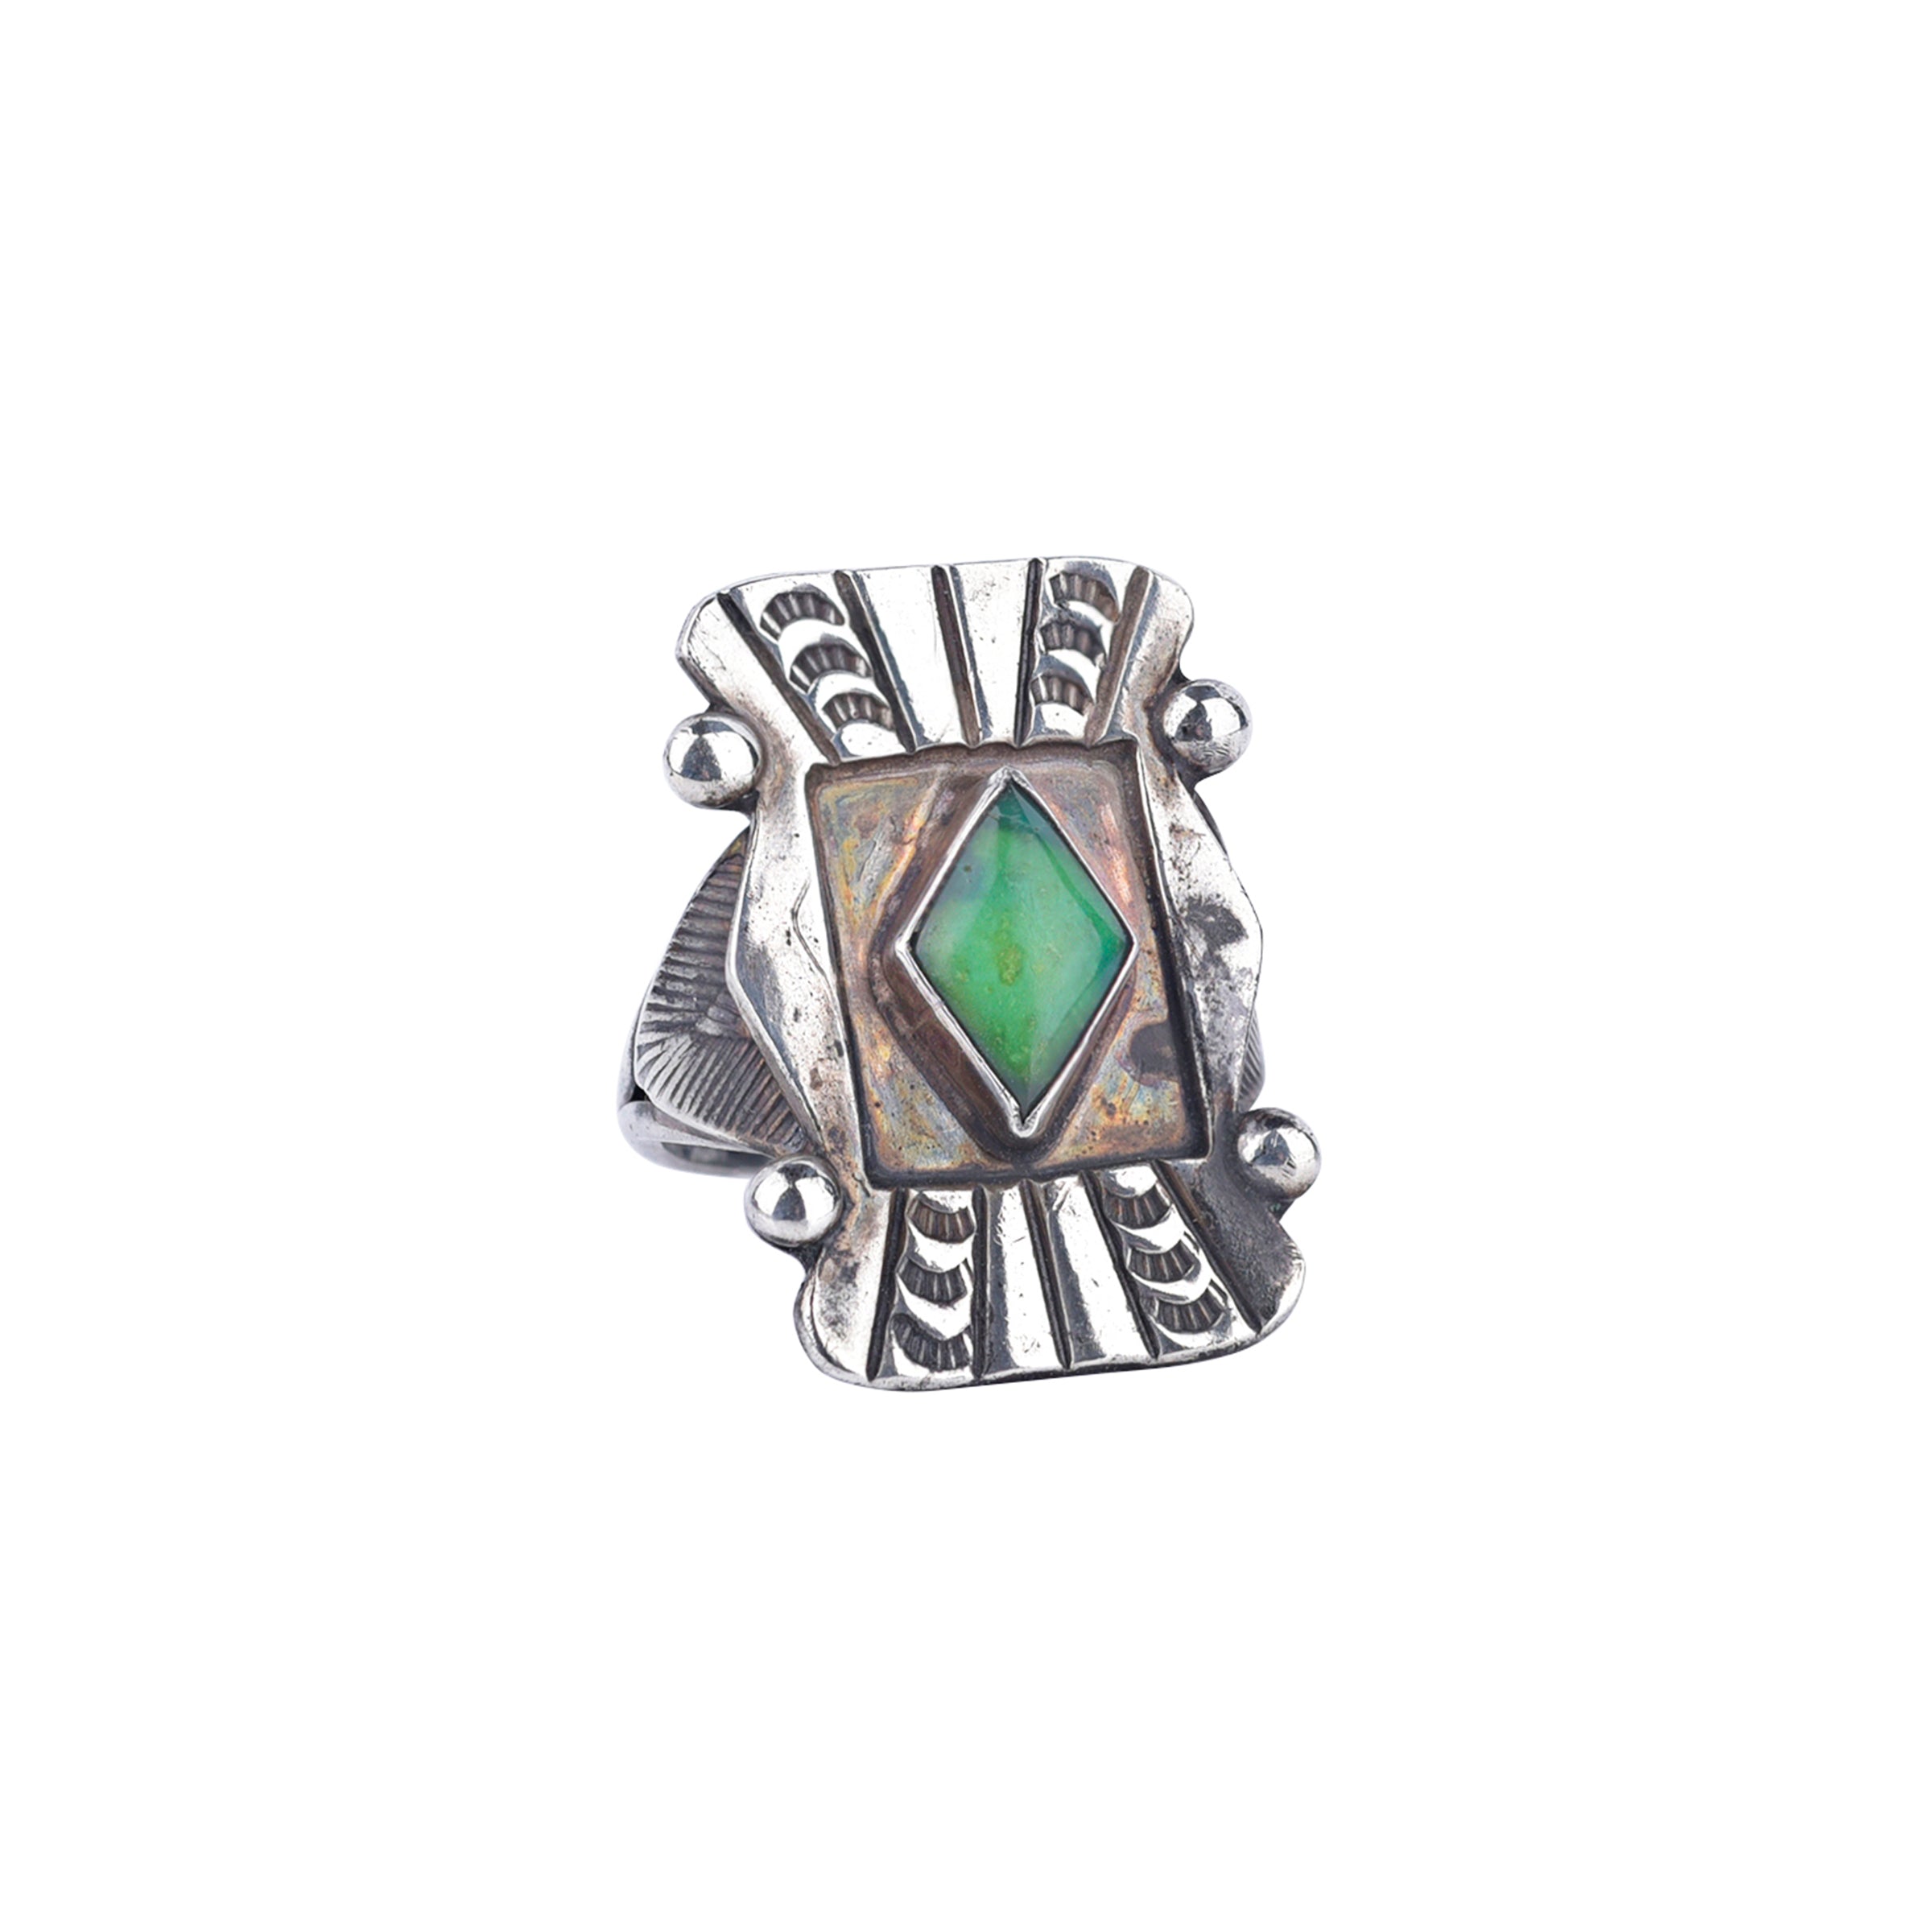 Vintage Green Turquoise Shield Ring - Size 8